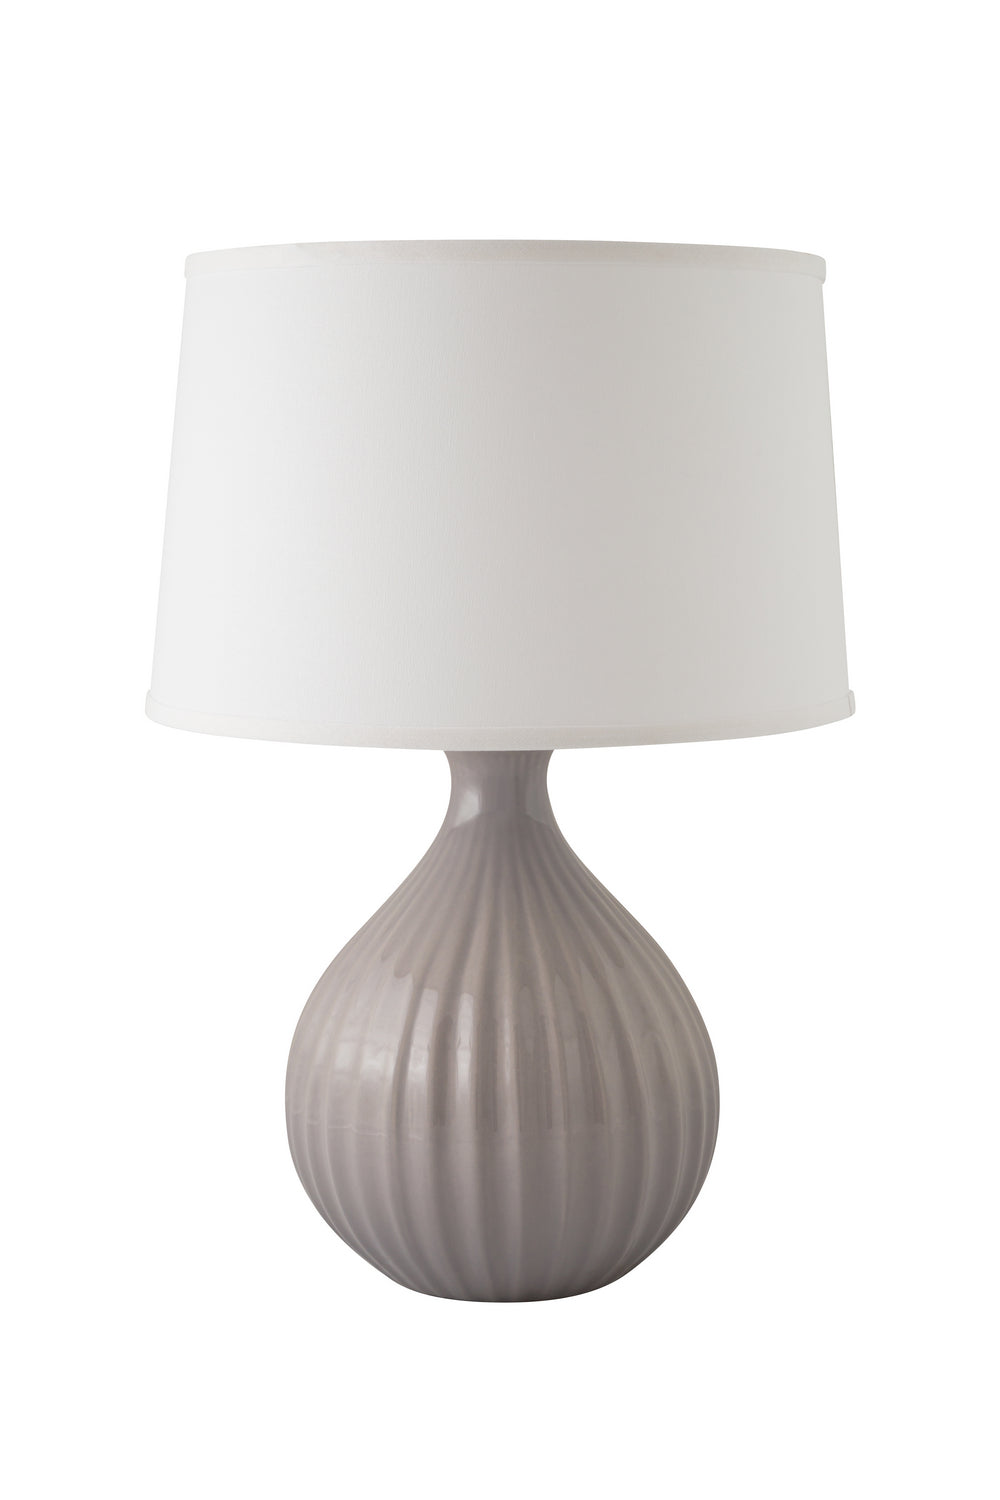 River Ceramic Lighting 358-10 Sprout One Light Table Lamp Lamp Gray